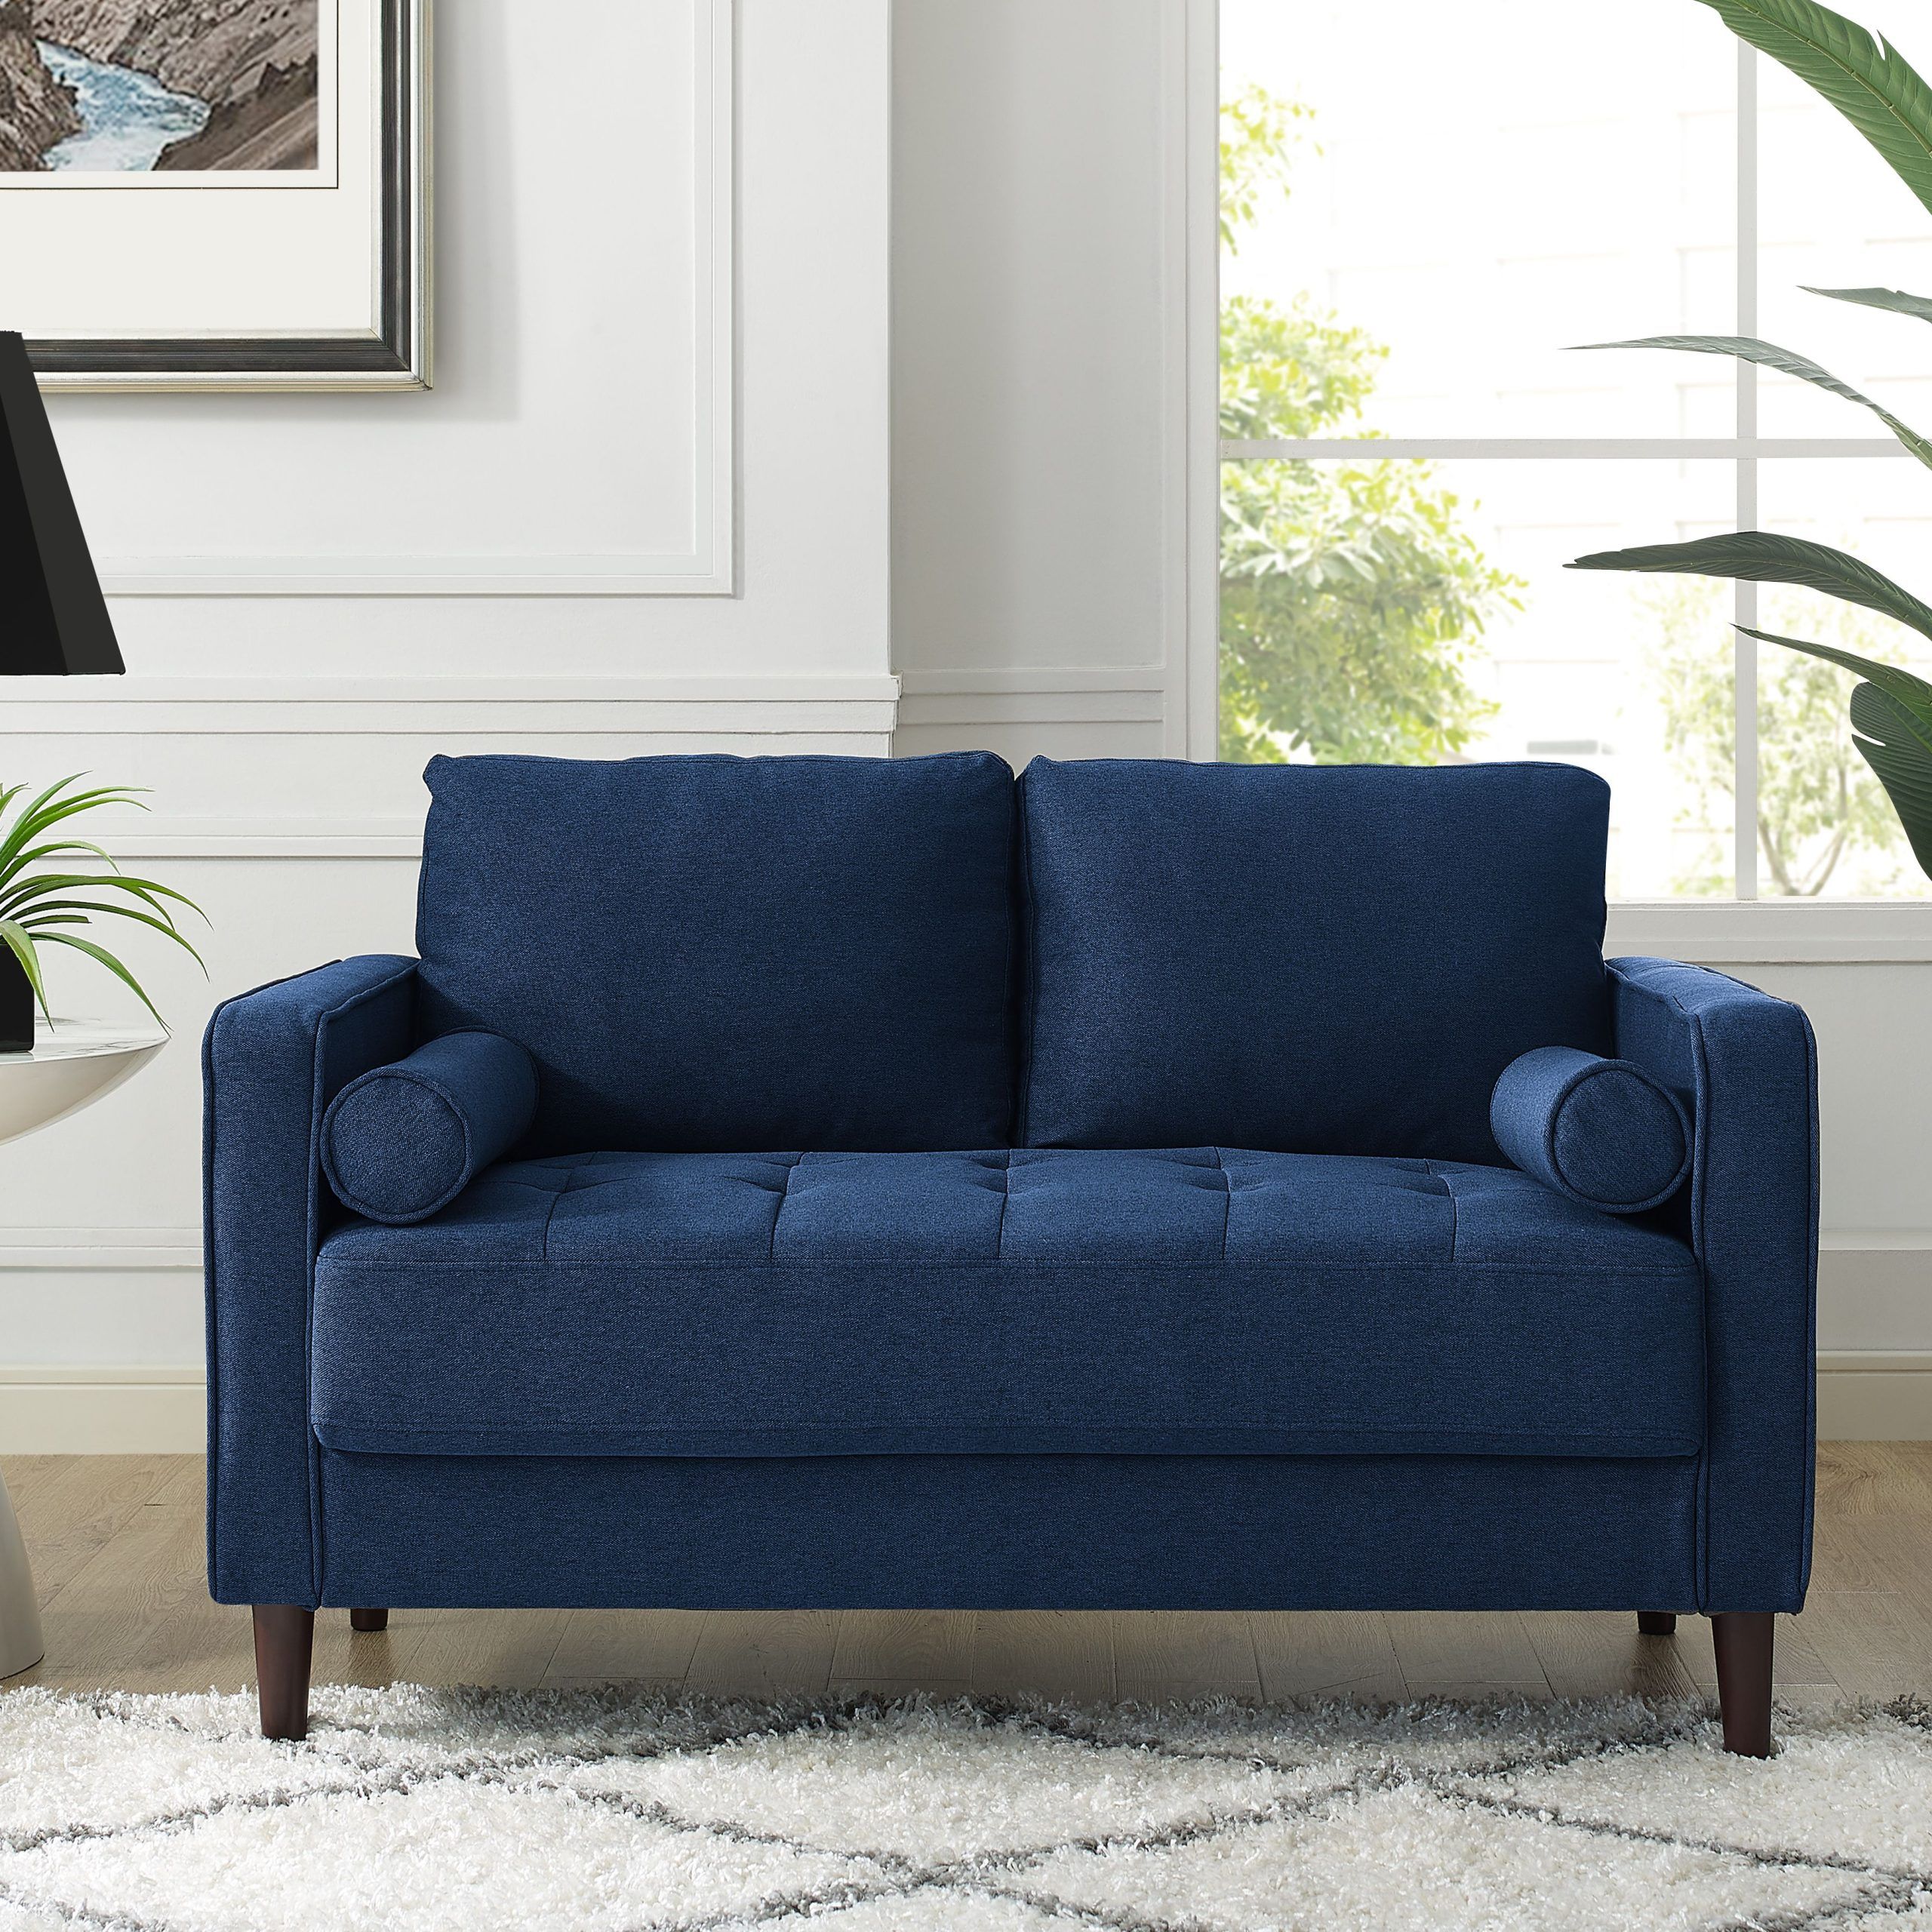 Latest Navy Sleeper Sofa Couches Intended For Lifestyle Solutions Lorelei Mid Century Modern Loveseat, Blue Fabric (View 13 of 15)